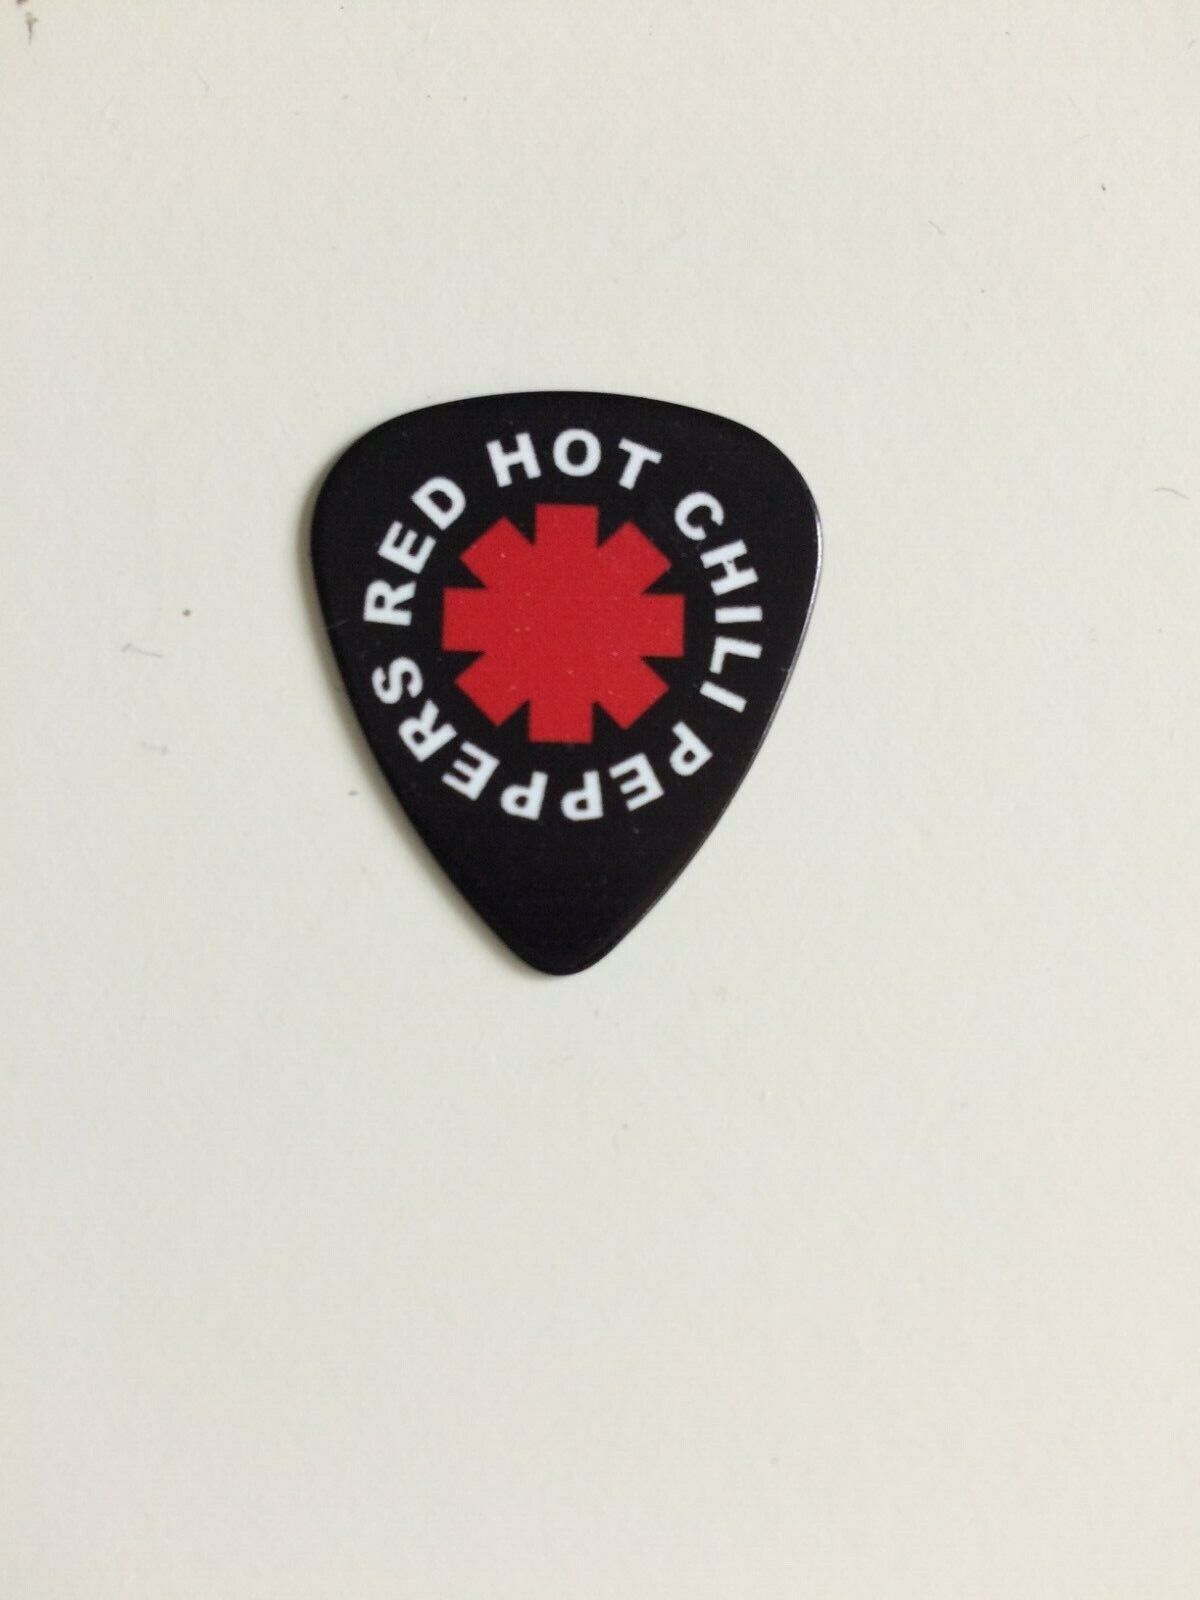 Red Hot Chili Peppers Set of 3 Guitar Pick NEW Never Used USA Shipper Без бренда - фотография #2